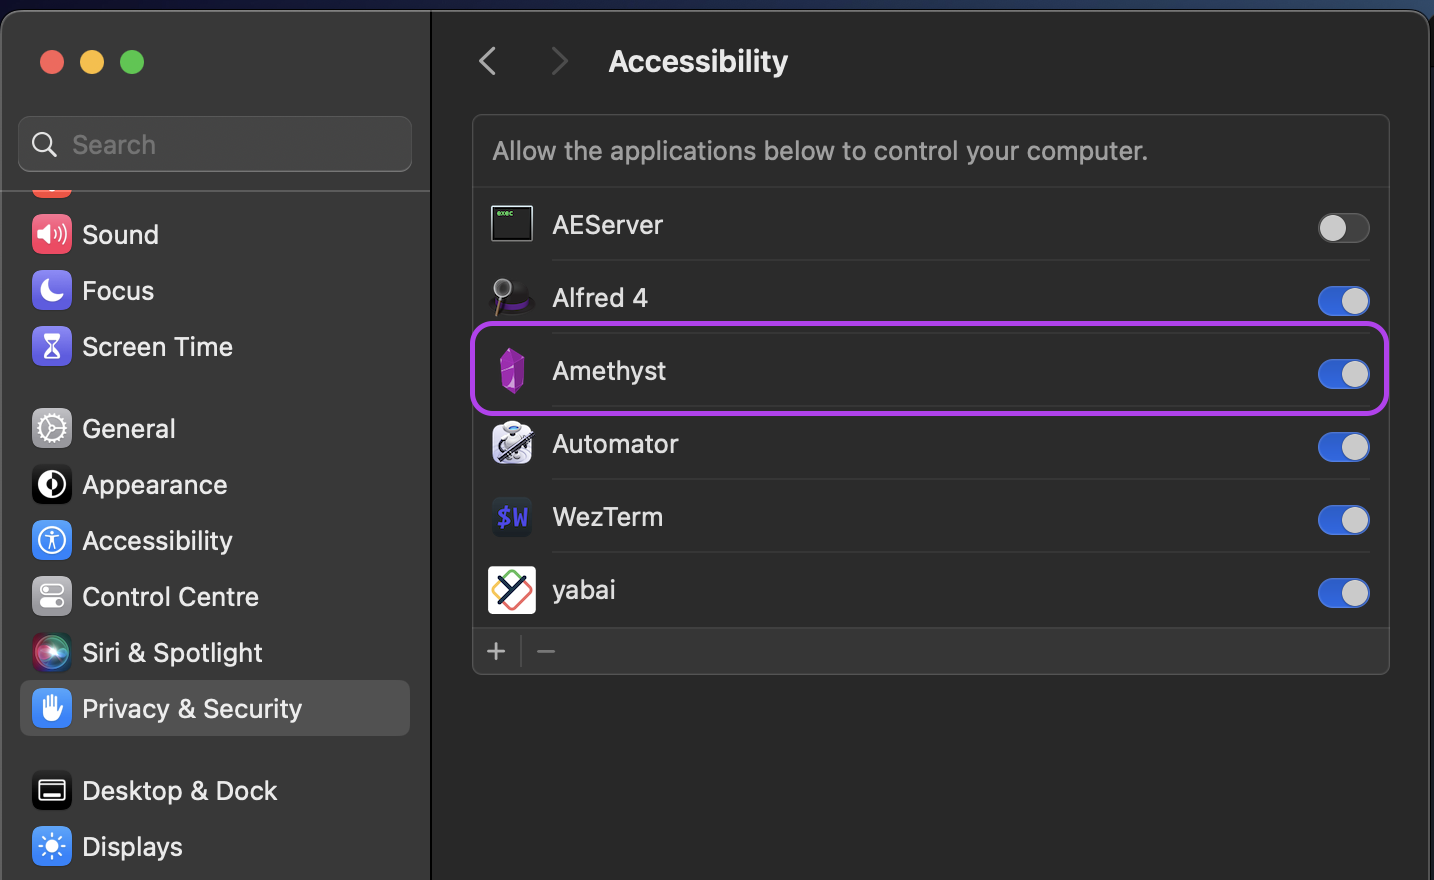 Give Accessibility permission to Amethyst under Privicay and Security.